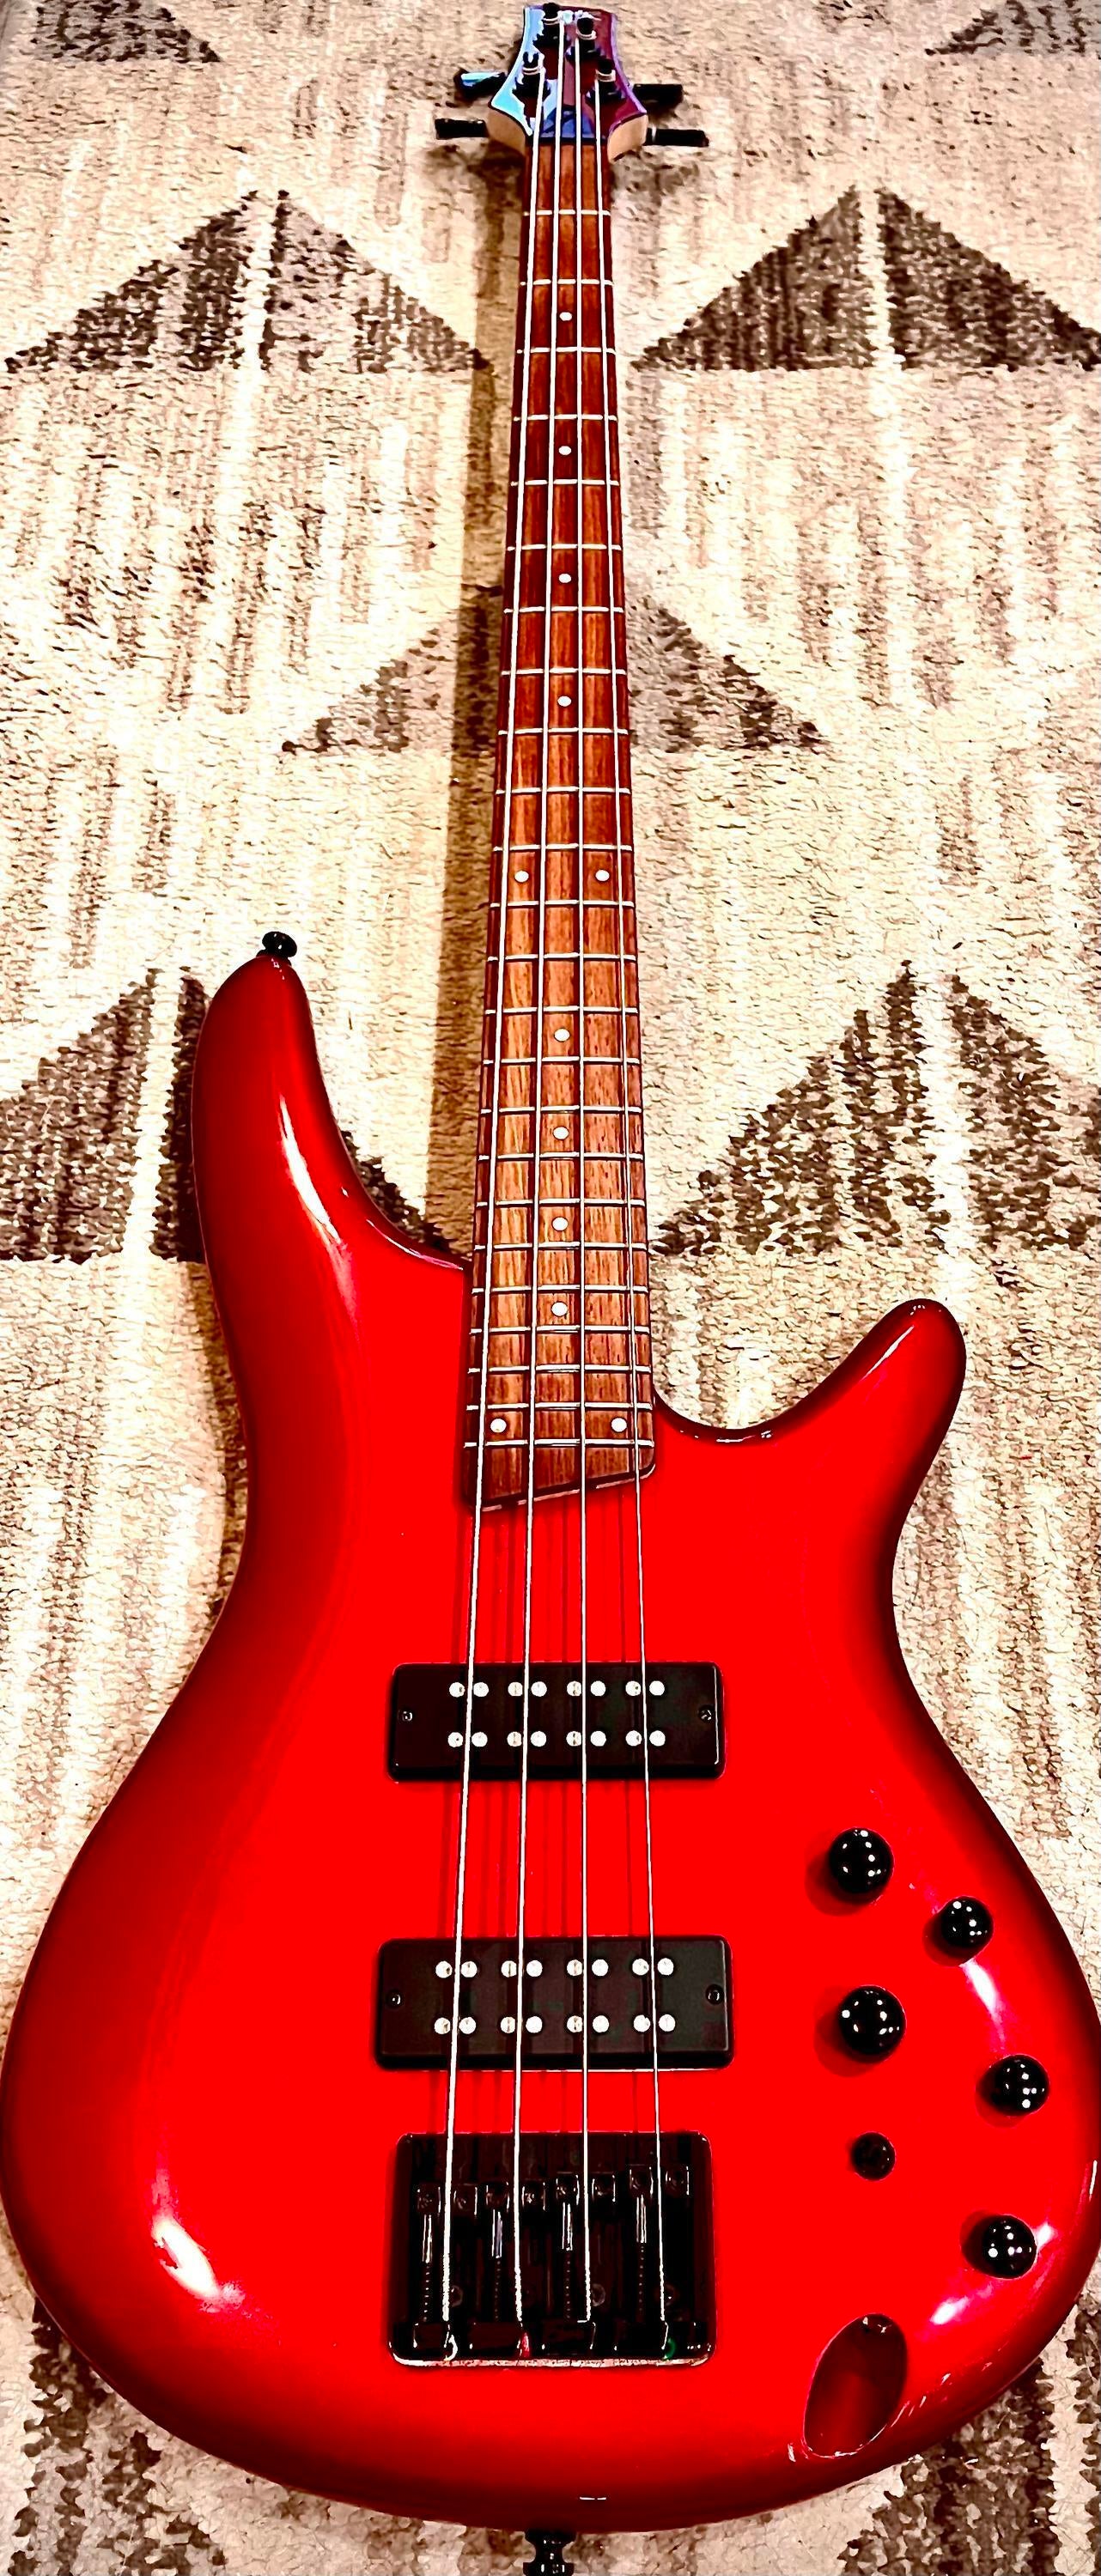 Used Ibanez SR300E 4-St Electric Bass Guitar - Sweetwater's Gear